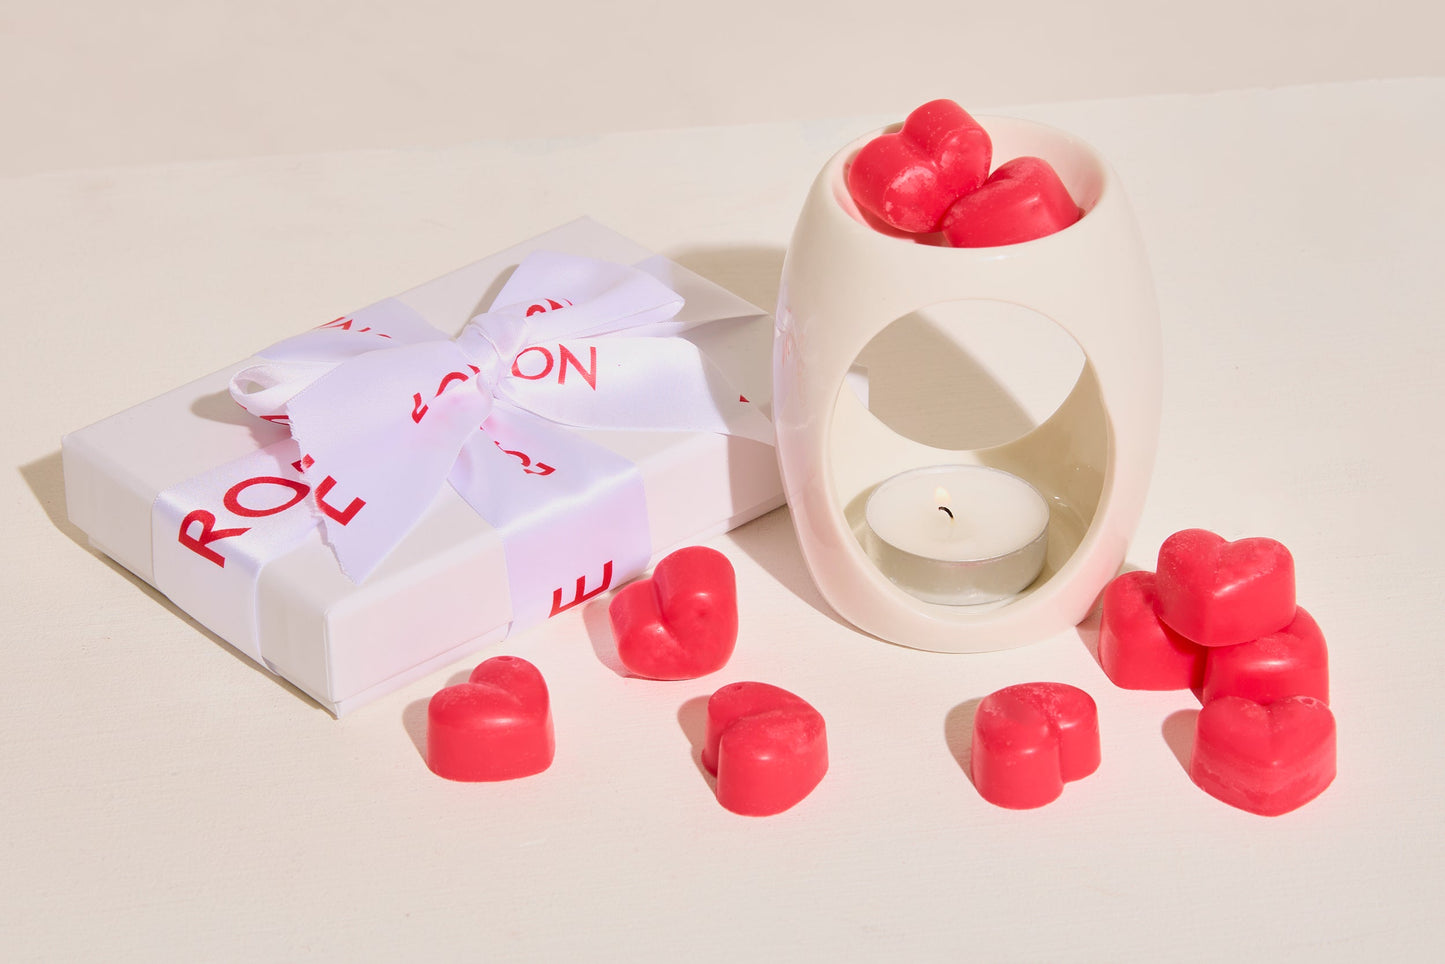 Hug - Orange Blossom Luxury Scented Wax Melts - By Rouge London